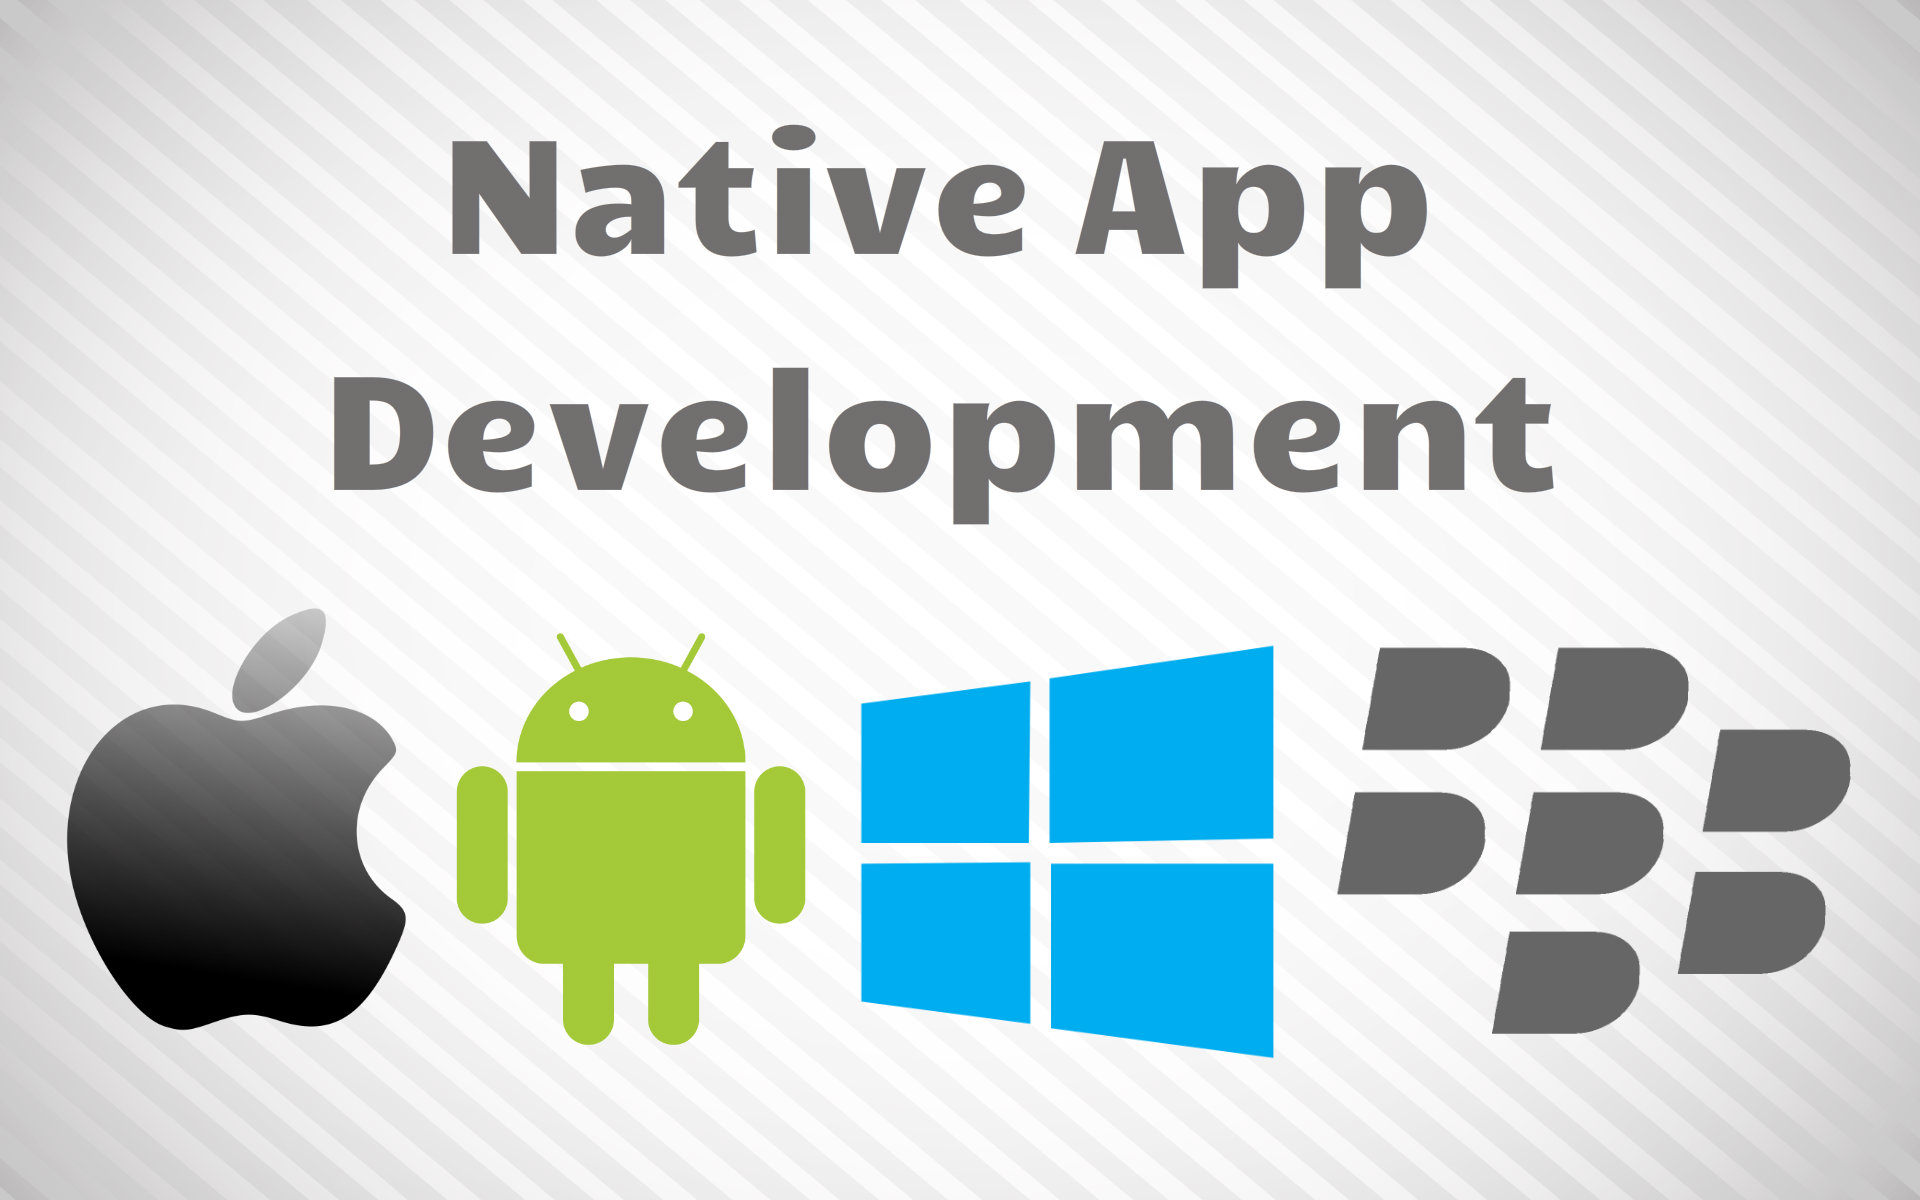 Native App Development Must Be Taken As Priority For A Better Experience